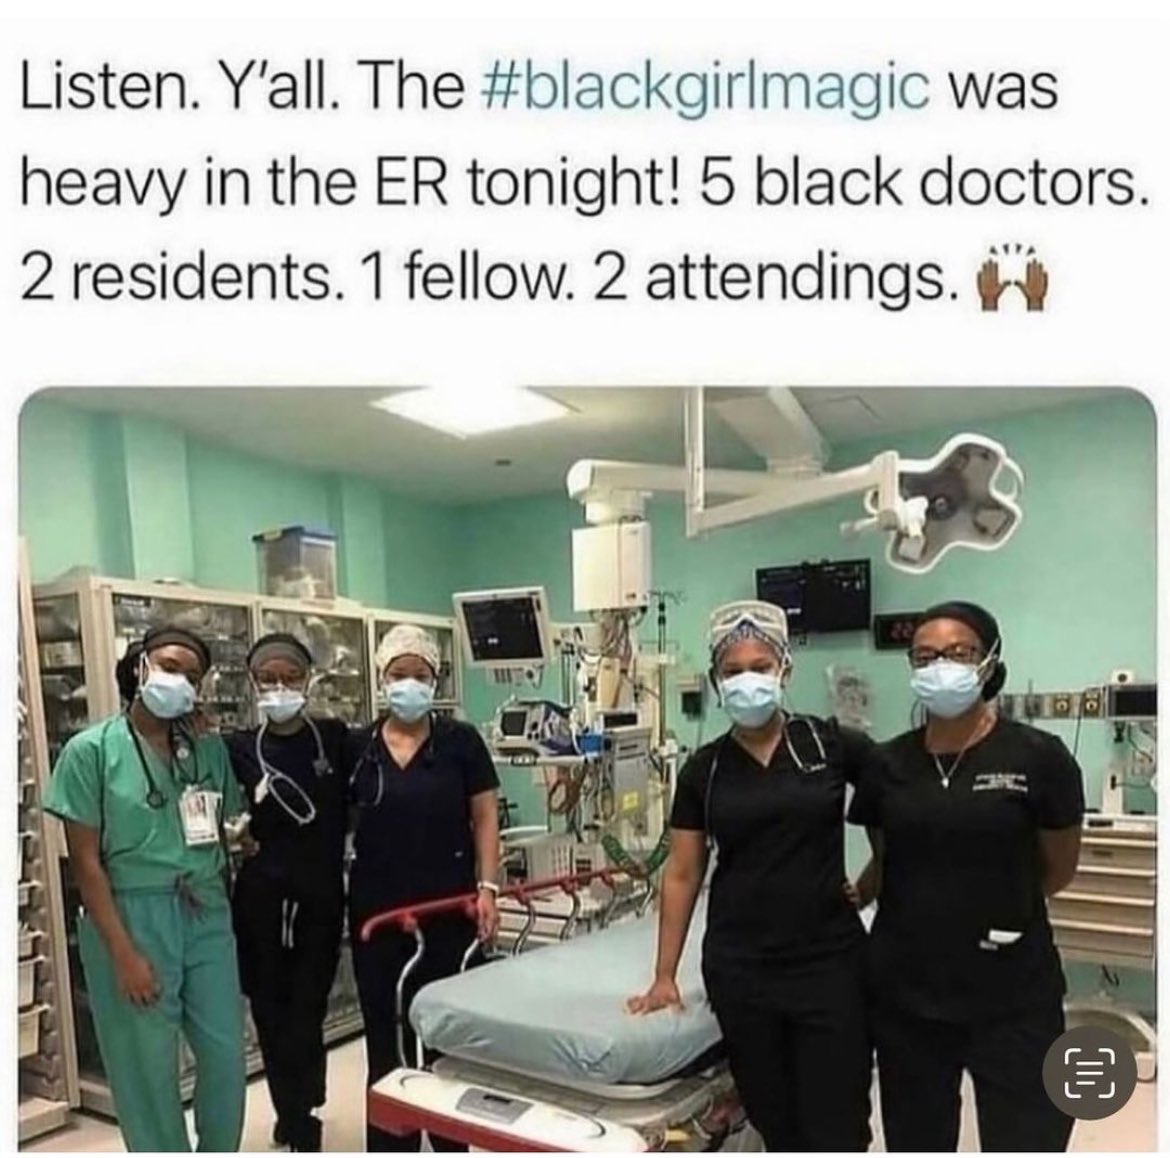 #BlackGirlMagic is also a form of #BlackHistory! And I post stuff like this 365 days a year, not just for #BlackHistoryMonth 
#BlackWomen
#BlackDoctors 
#BlackInMedicine
#BlackHealth 
👸🏾👸🏾👸🏾